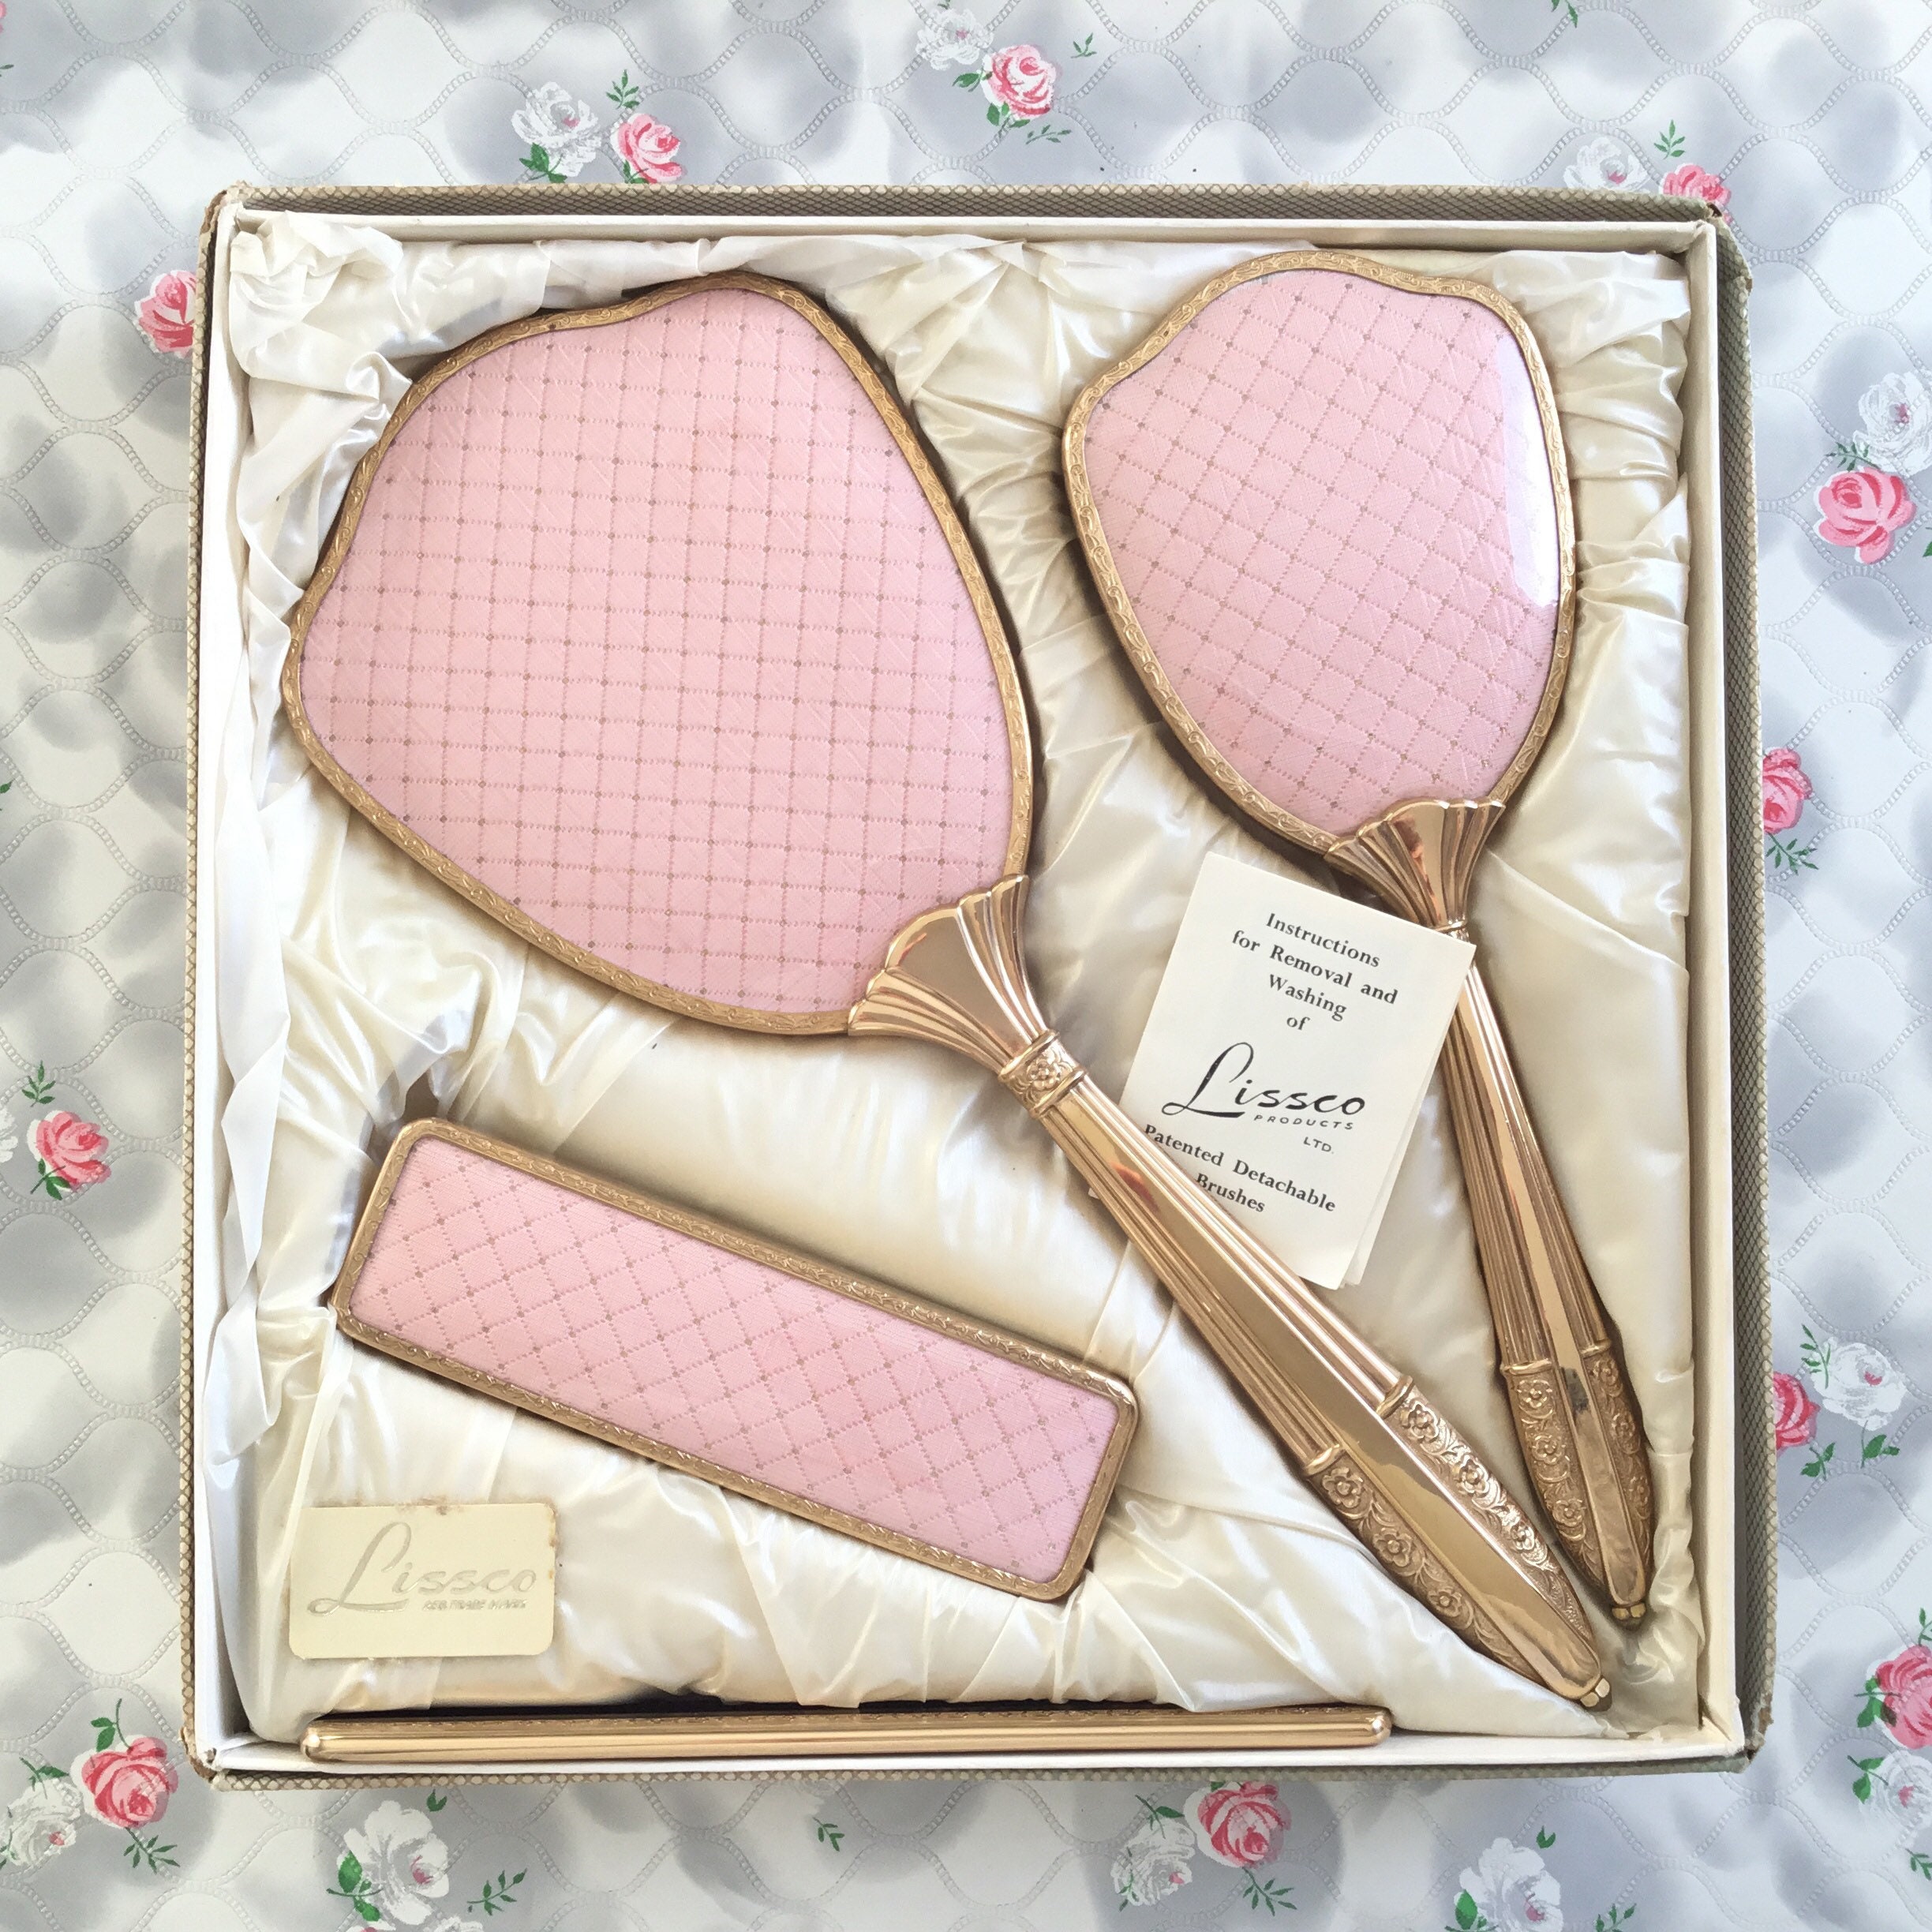 Lissco Brush Set C 1960s Unsed With Box Pink Dresser Set With